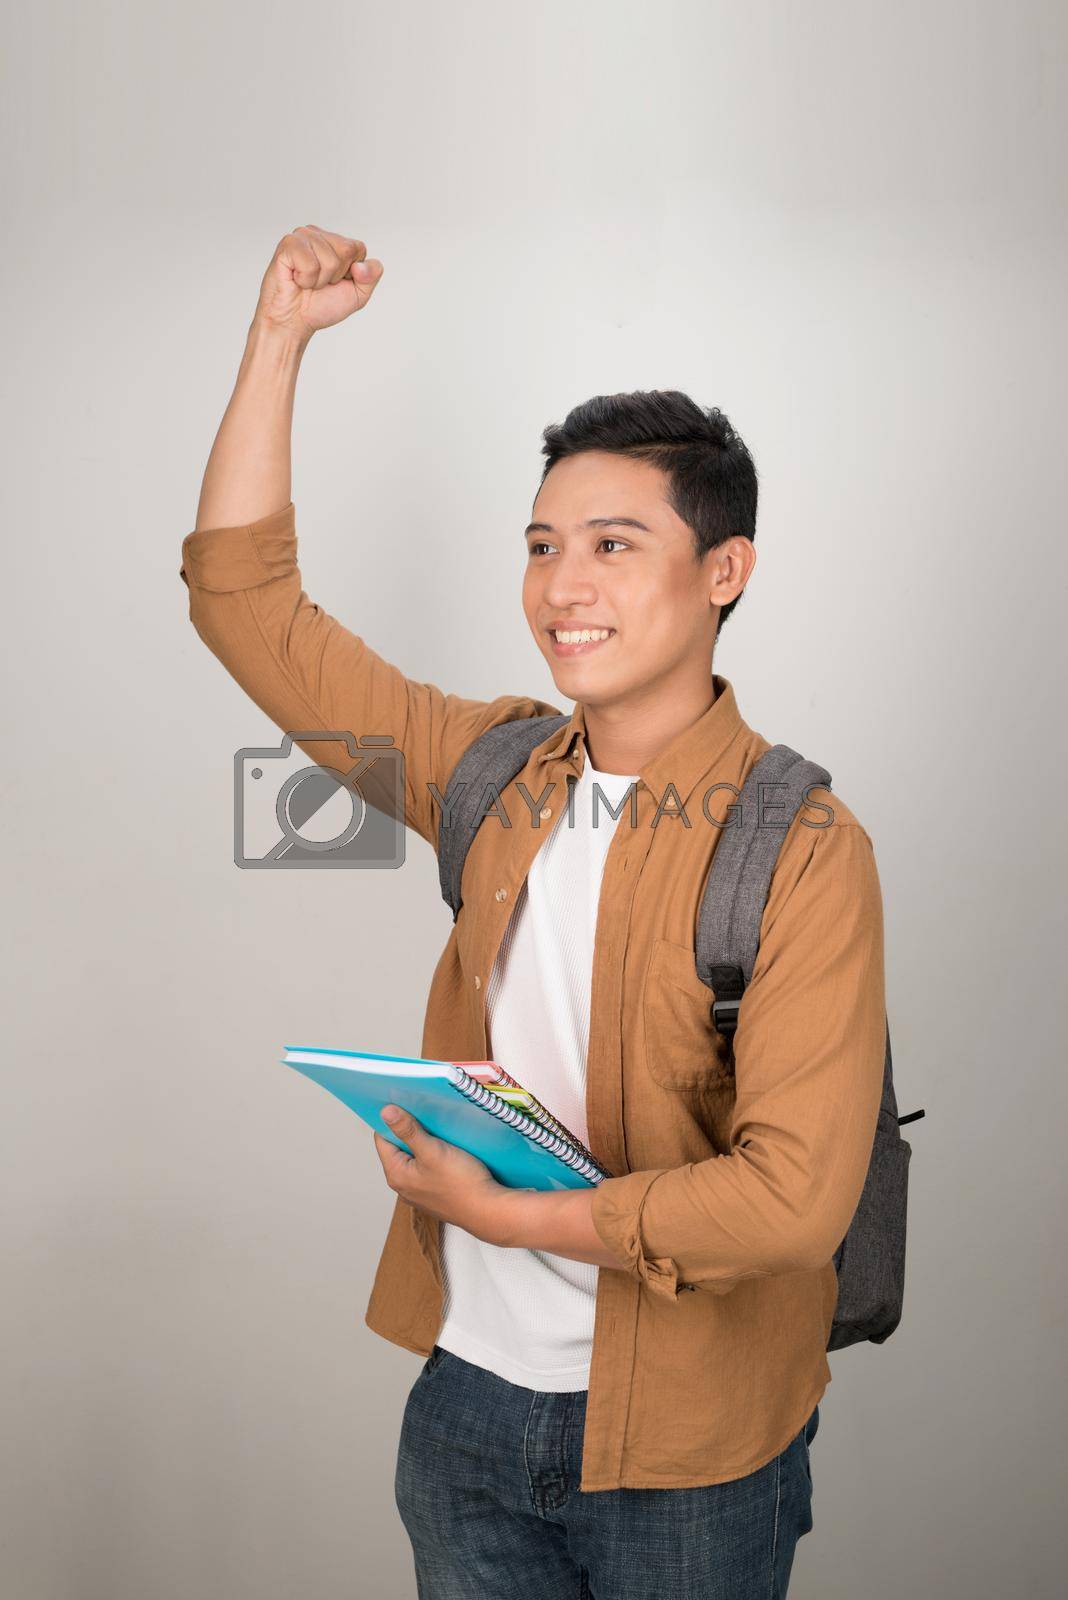 Royalty free image of Handsome Asian excited student happy smile looking at camera, isolated on white background by makidotvn